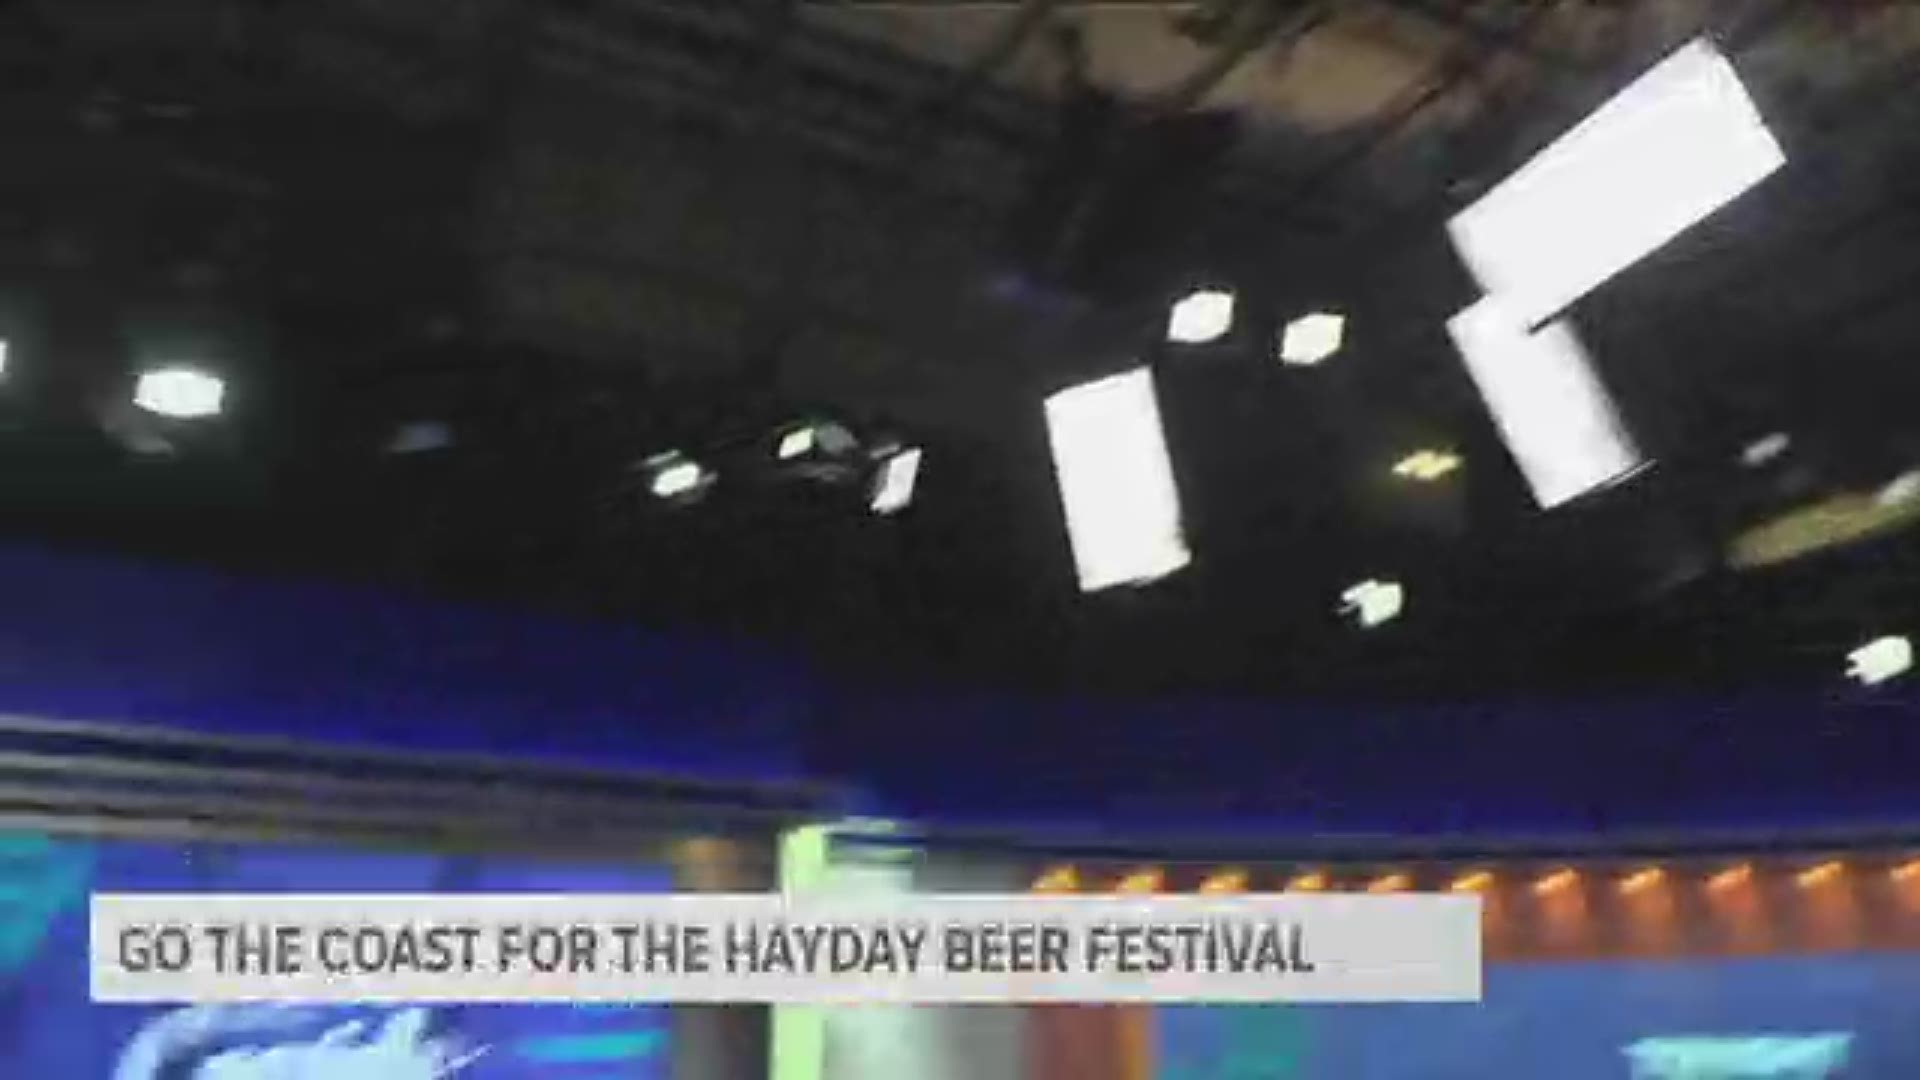 Spend this Saturday at Cannon Beach to enjoy the Hayday Beer Festival.
haydayfest.com
#TonightwithCassidy